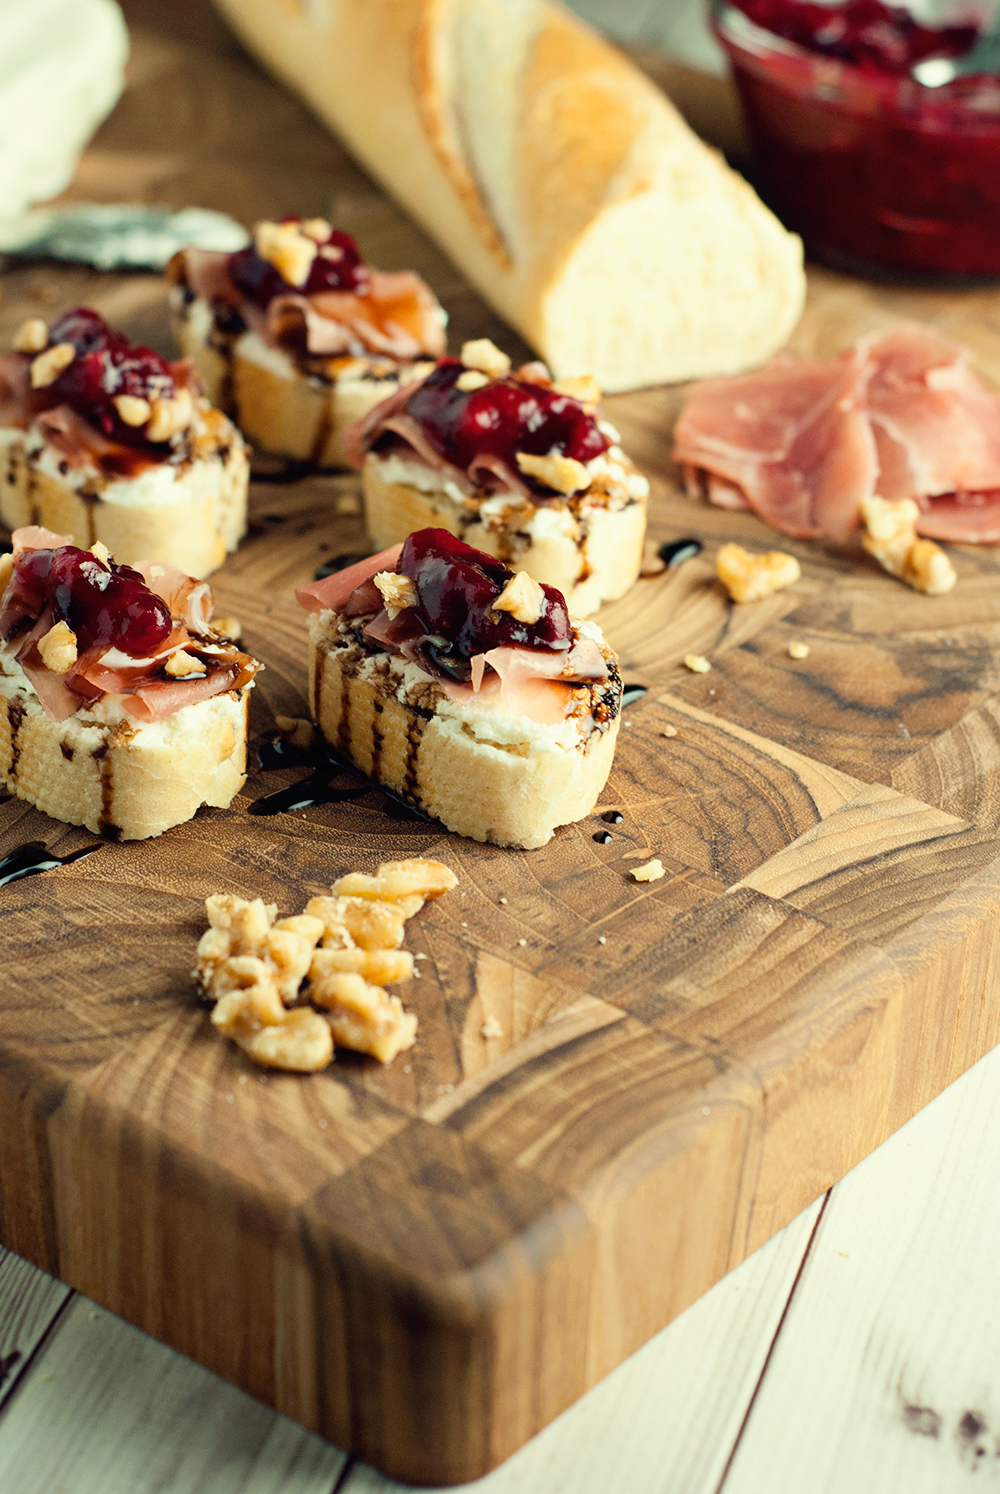 Make the perfect party appetizer with these goat cheese, prosciutto, and cranberry crostini!